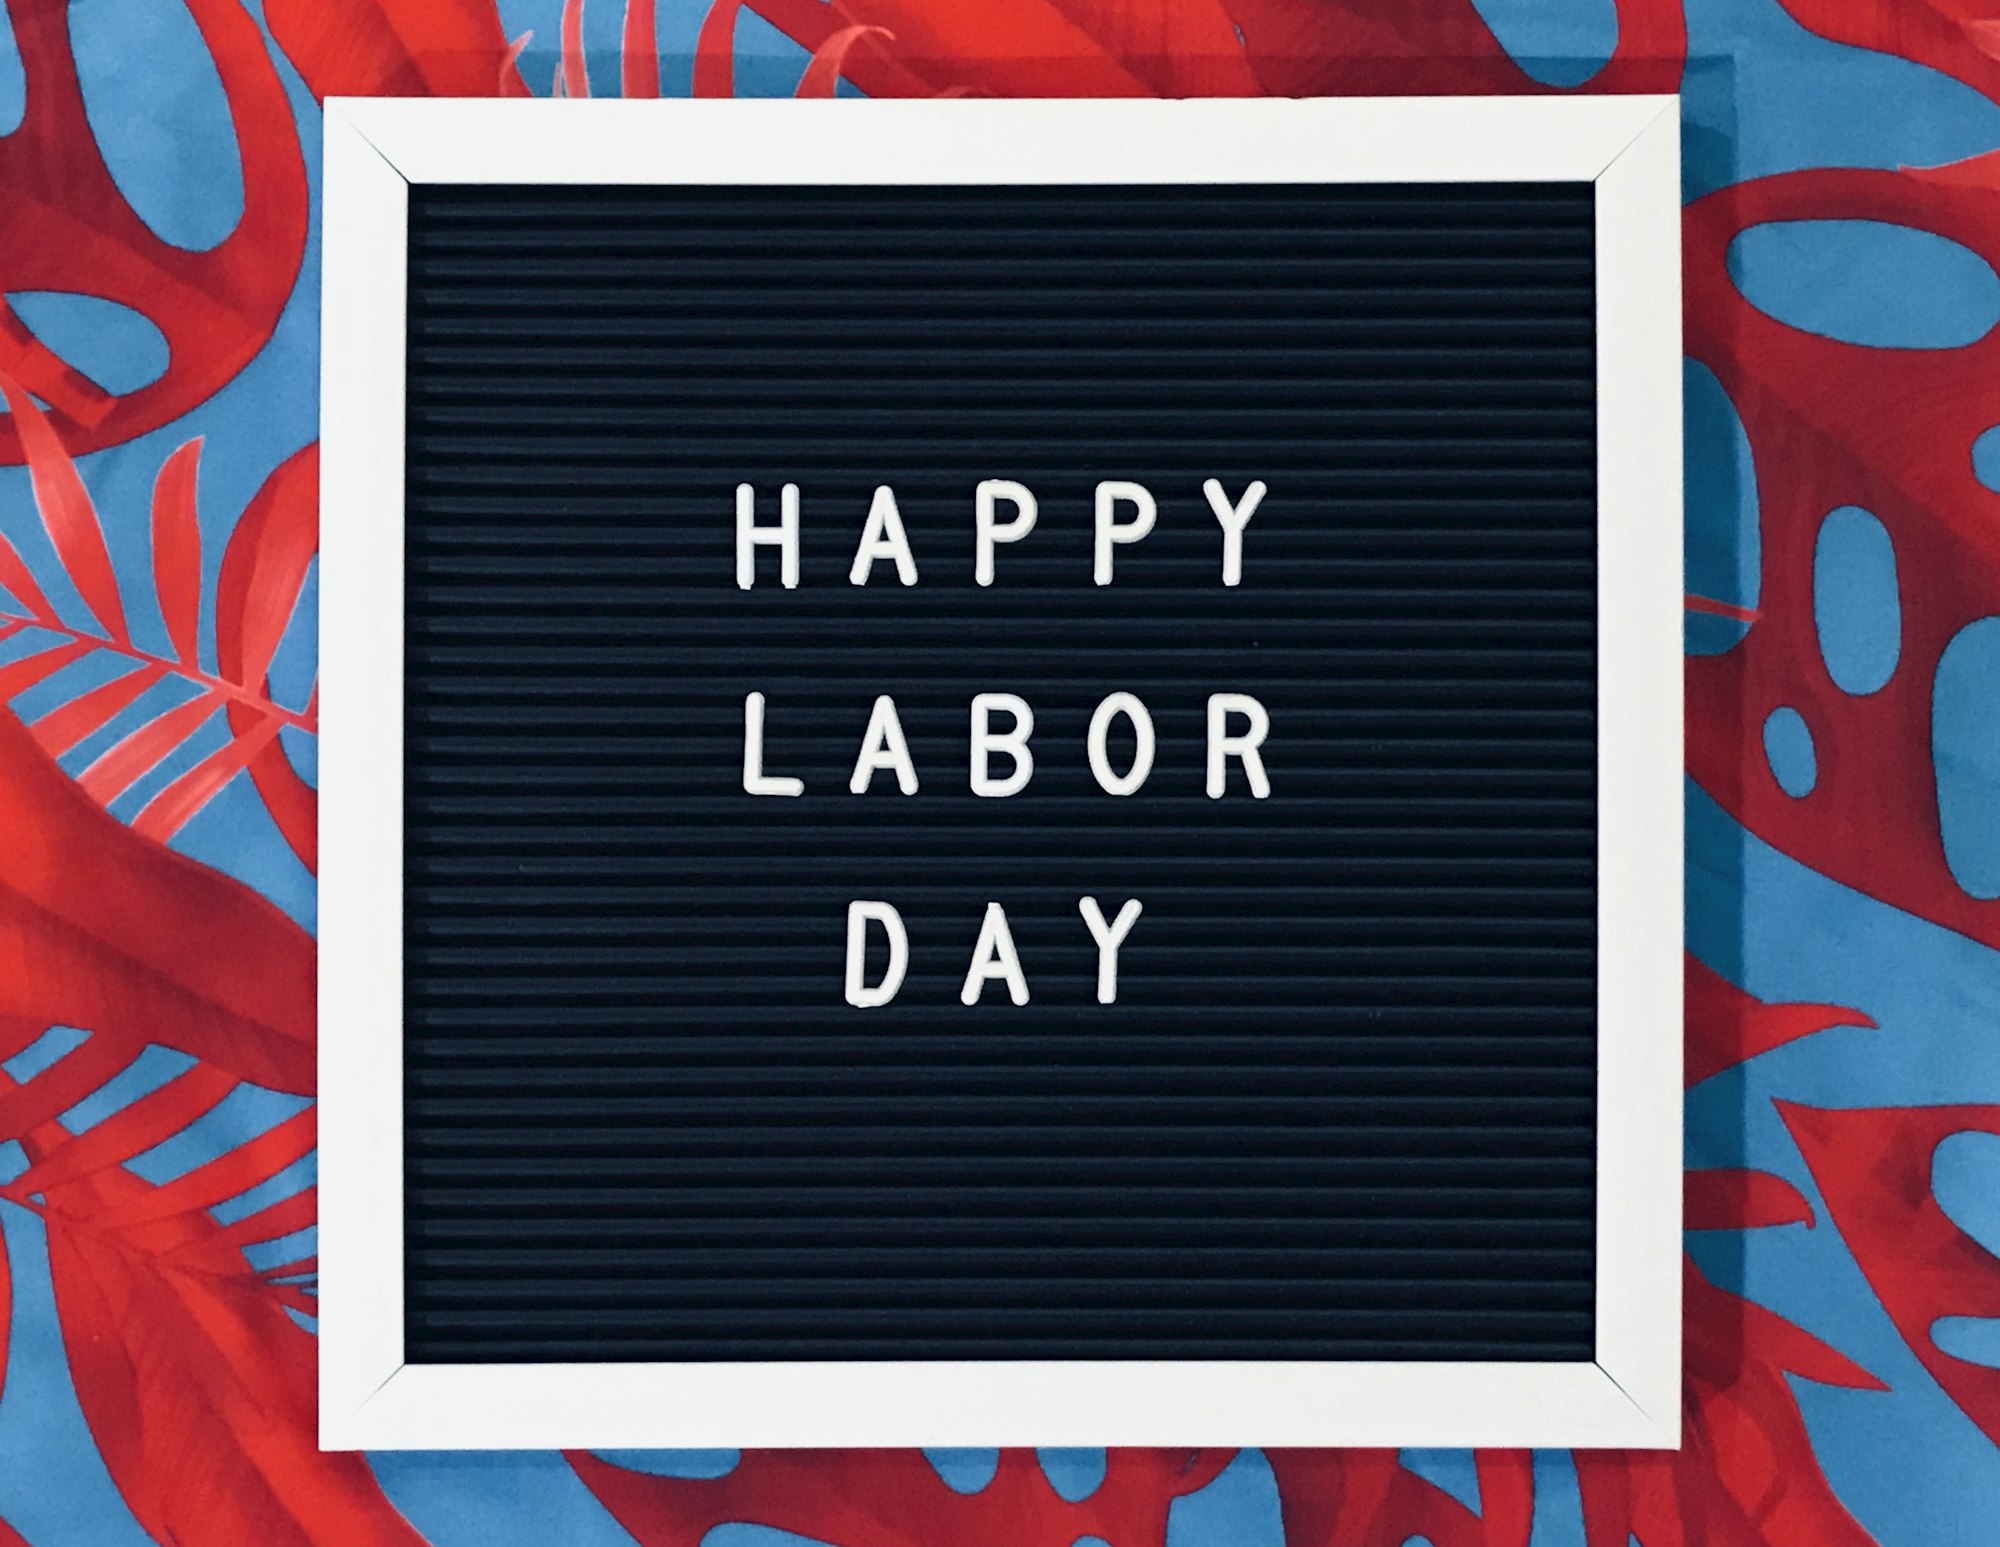 Happy Labor Day sign on red and blue background 69